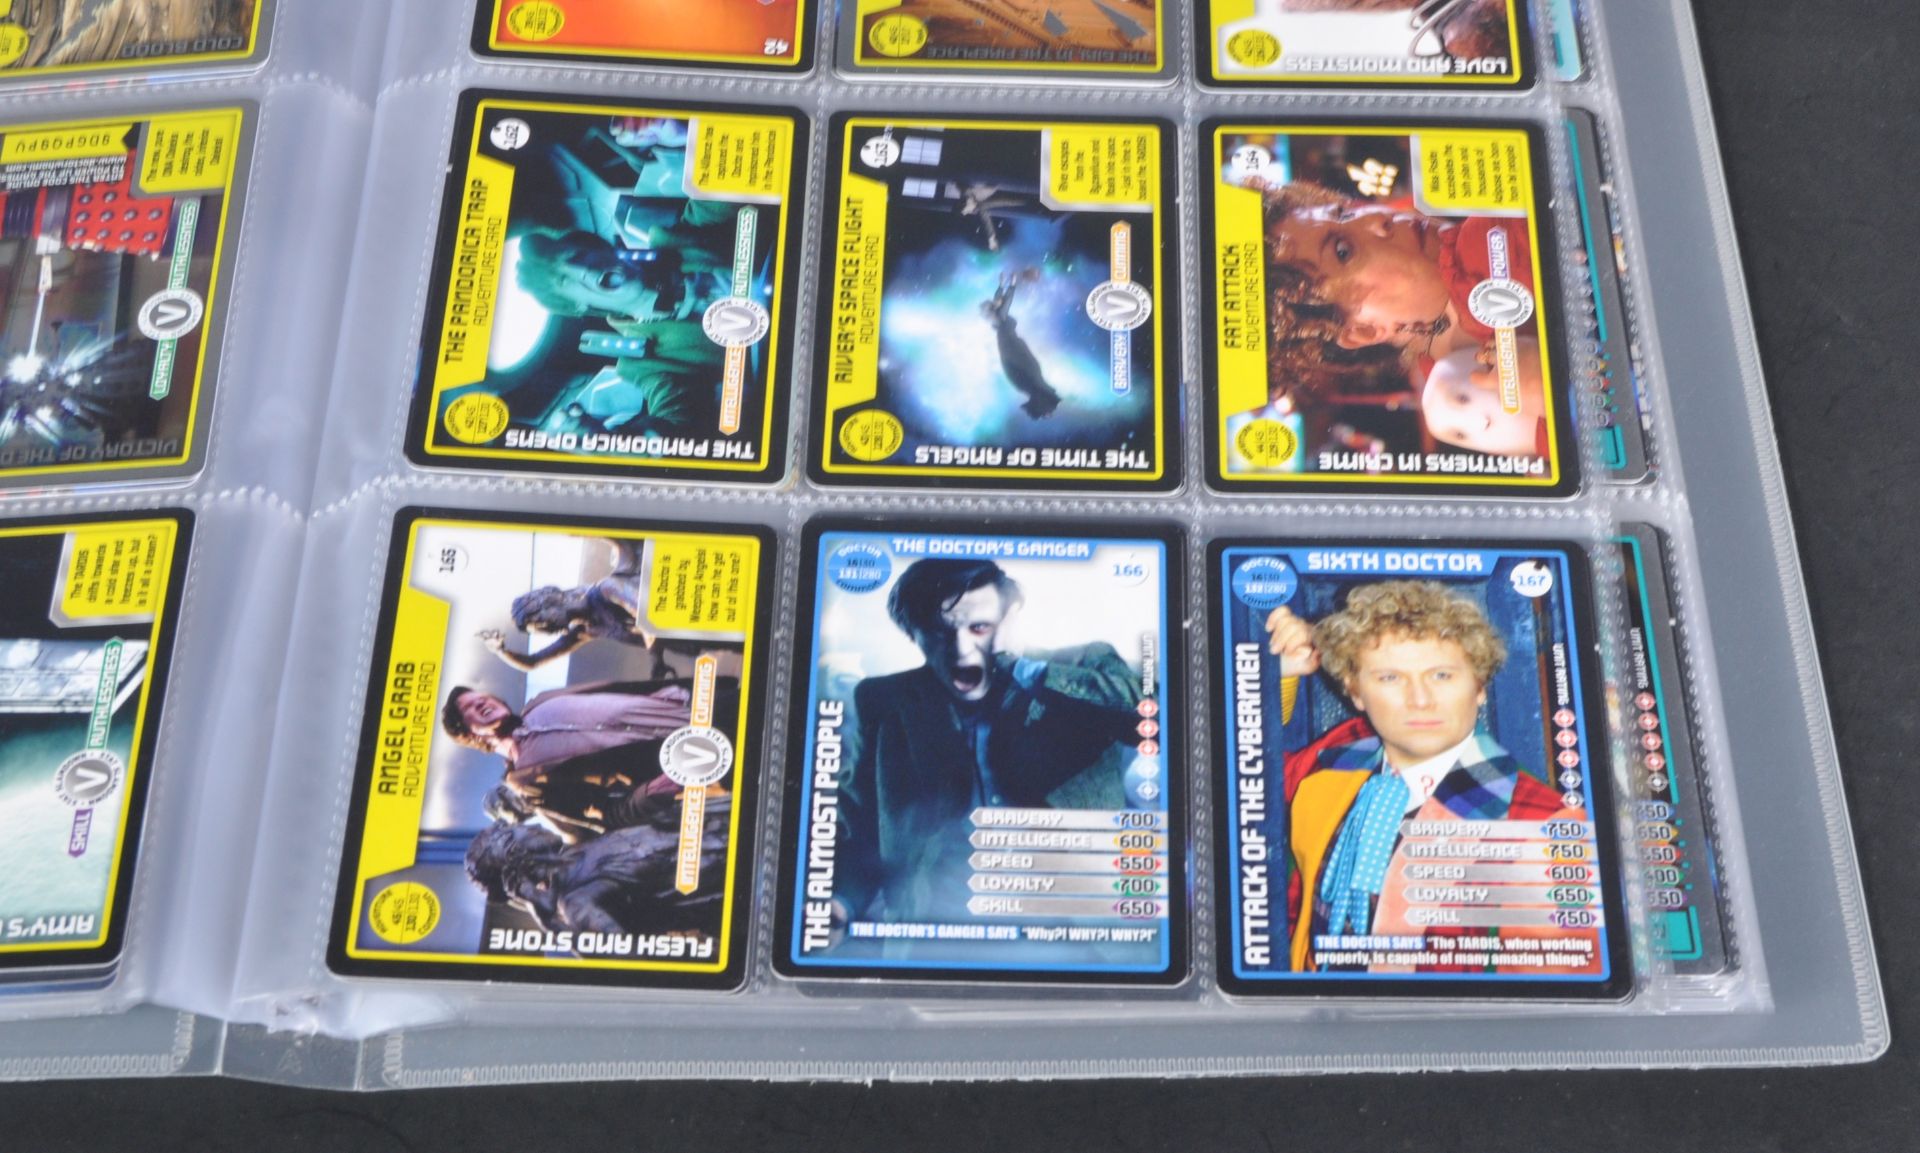 DOCTOR WHO - TRADING CARDS - MONSTER INVASION - FULL SET - Image 5 of 8